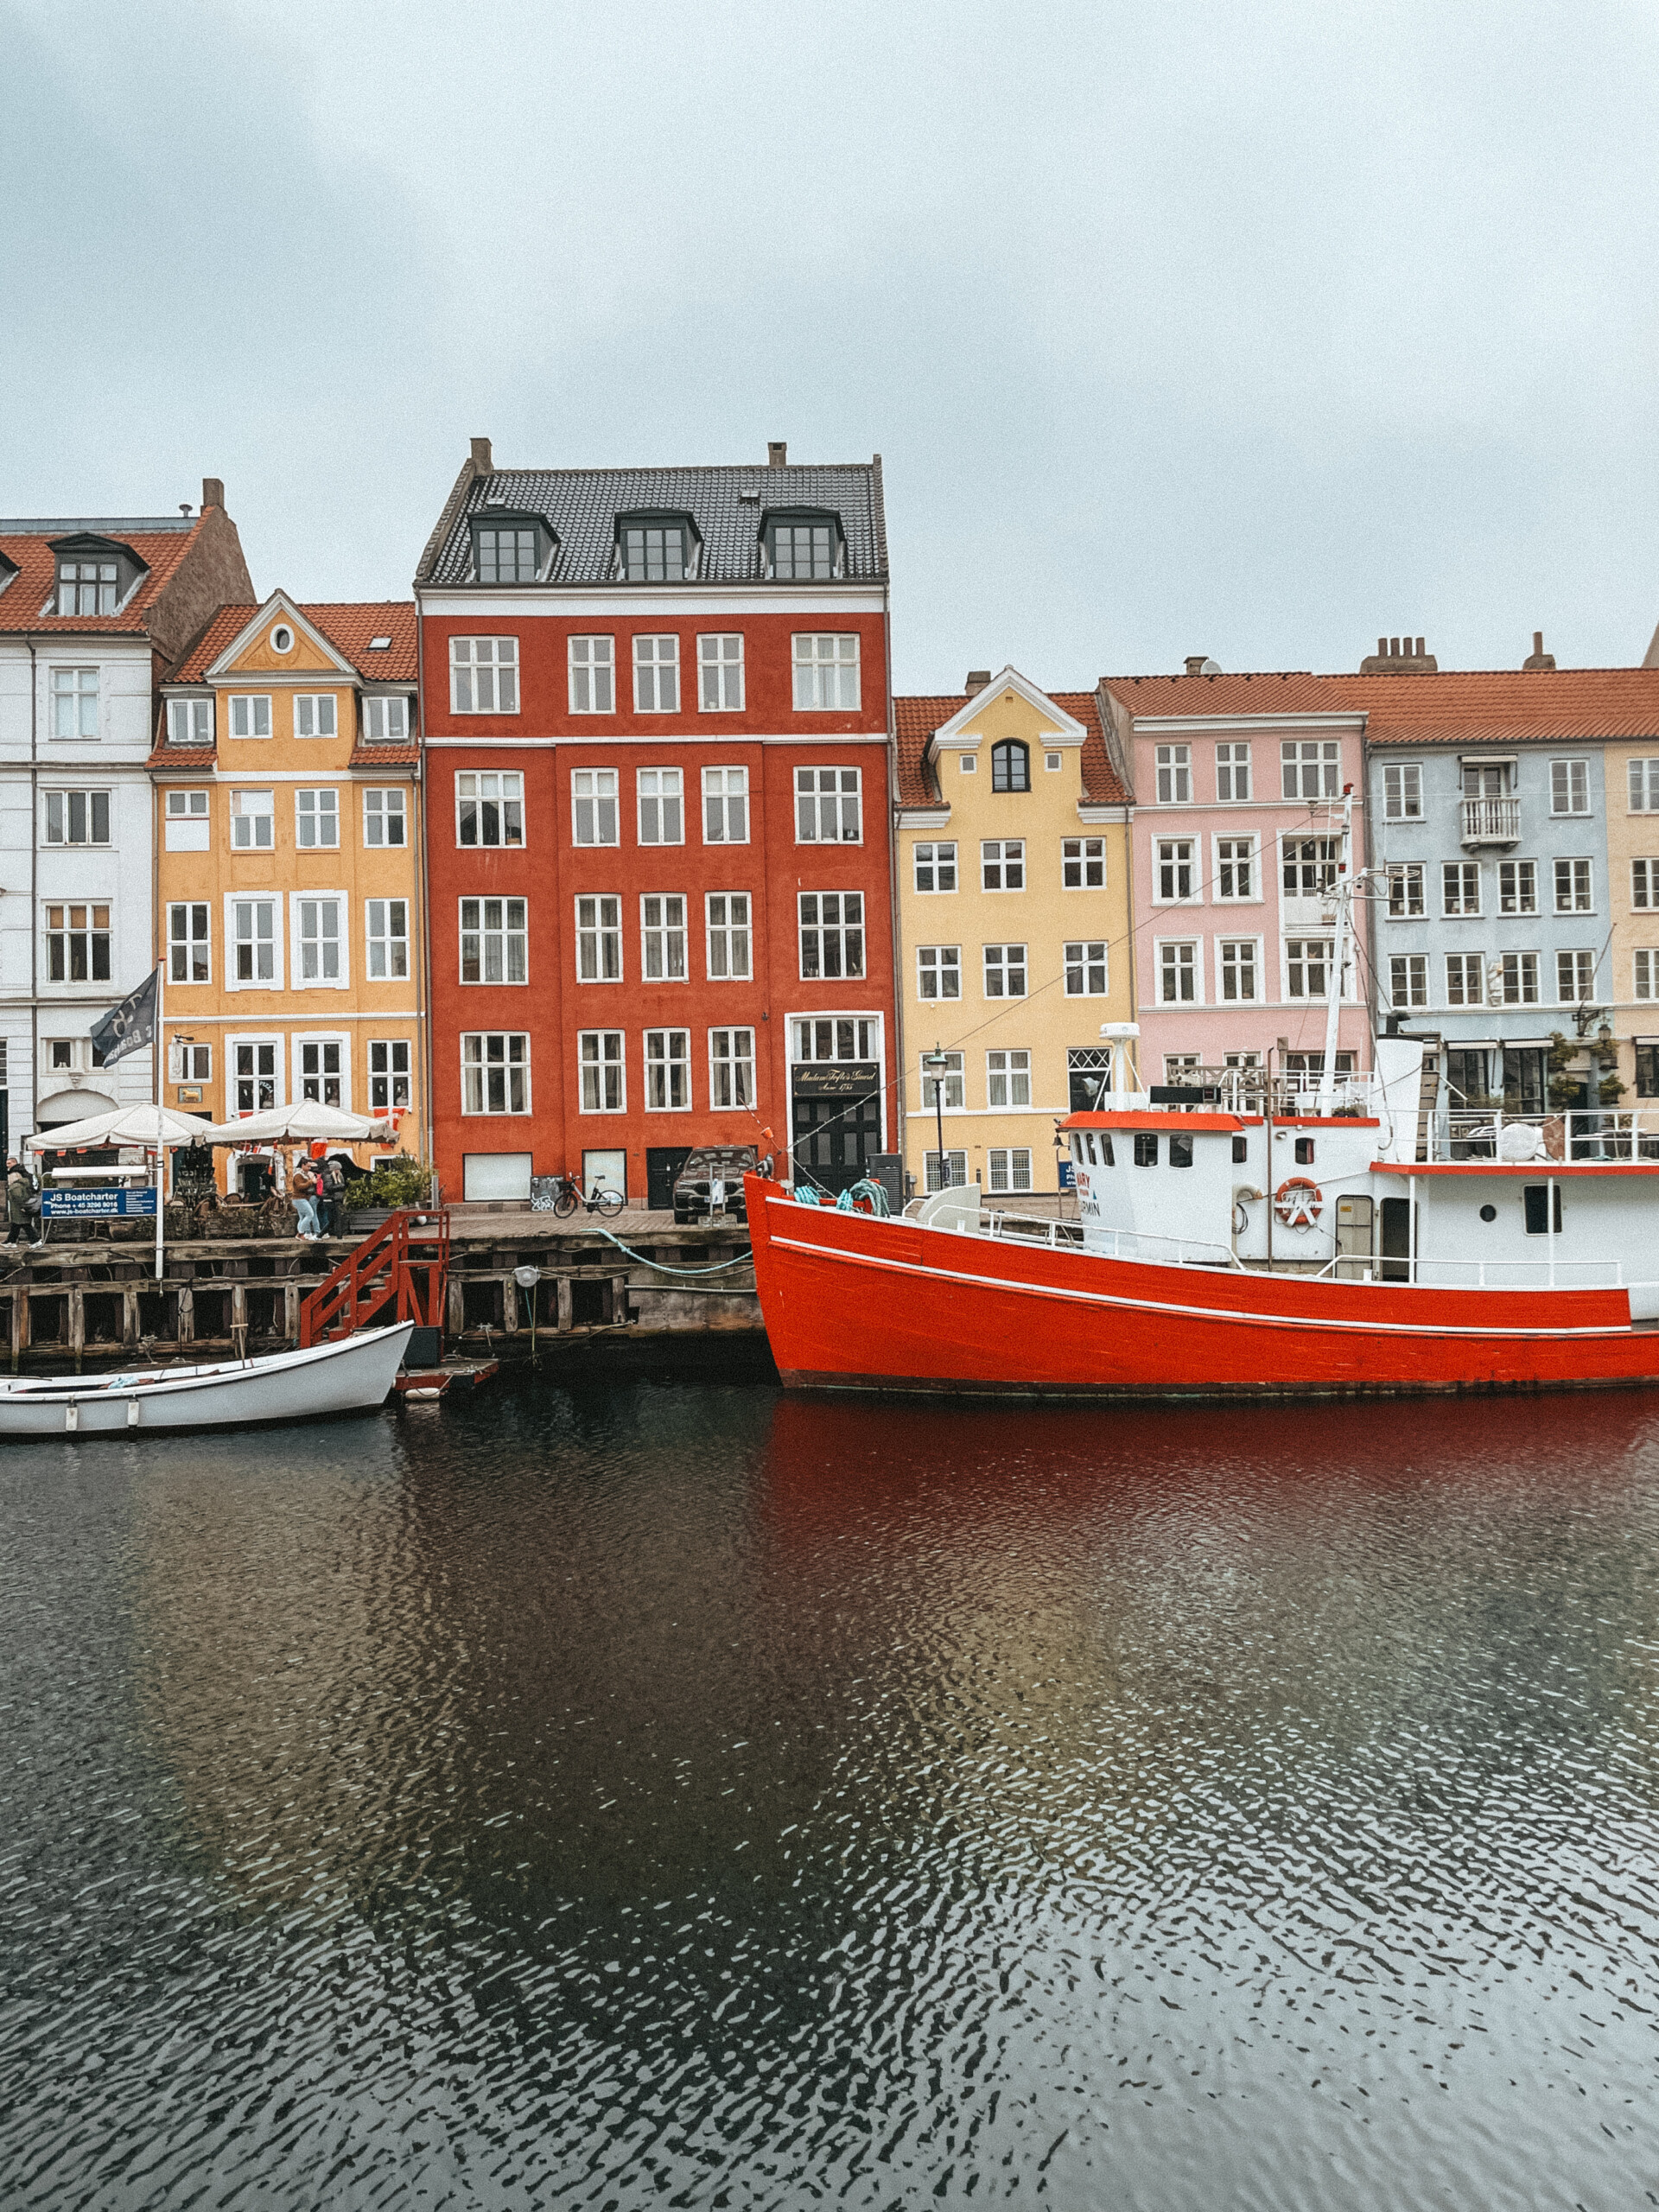 Your Guide to Copenhagen—Where to Eat, Stay, and Shop in This Creative Capital